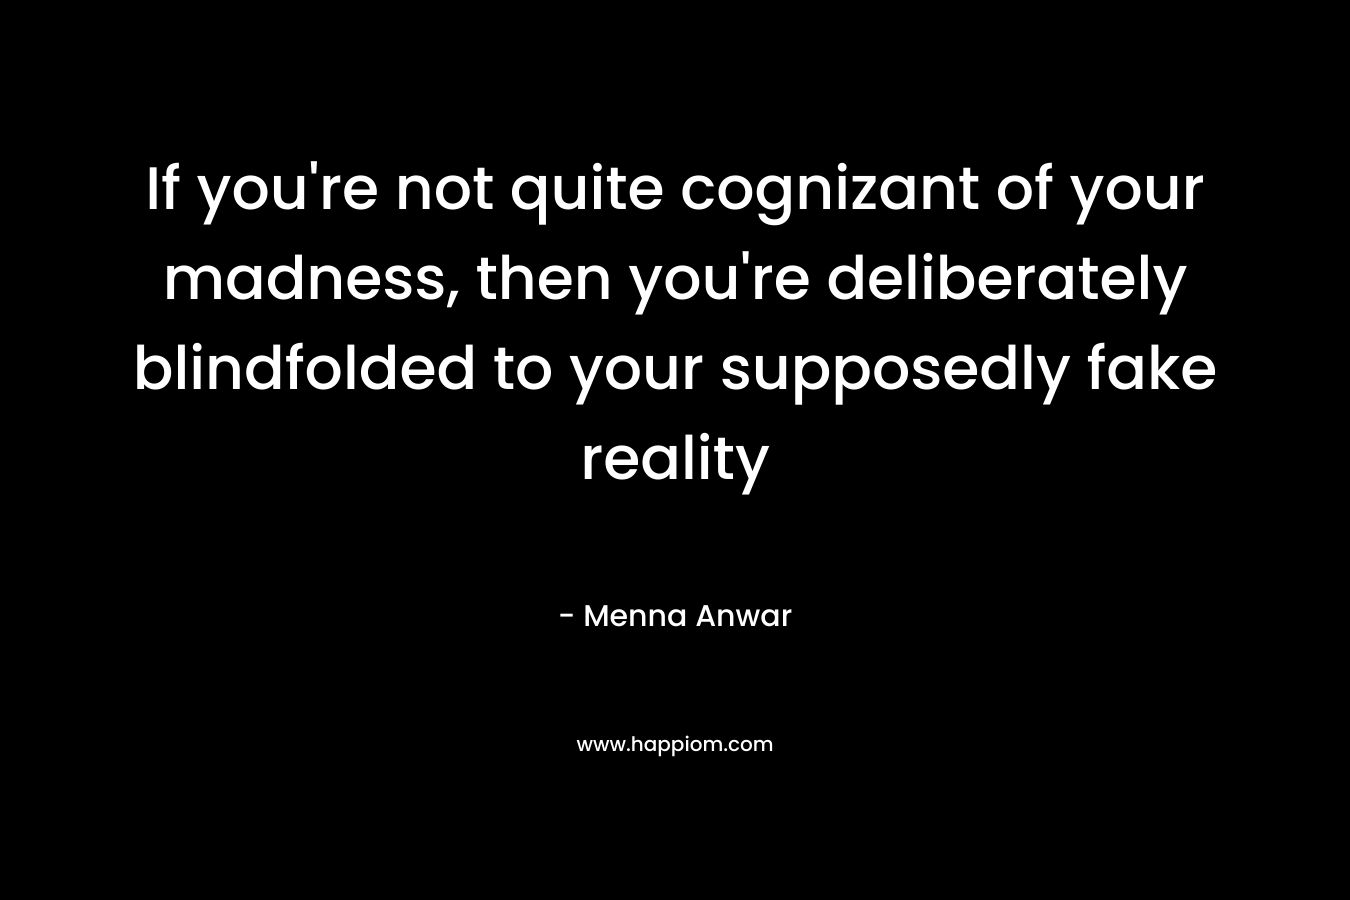 If you’re not quite cognizant of your madness, then you’re deliberately blindfolded to your supposedly fake reality – Menna Anwar